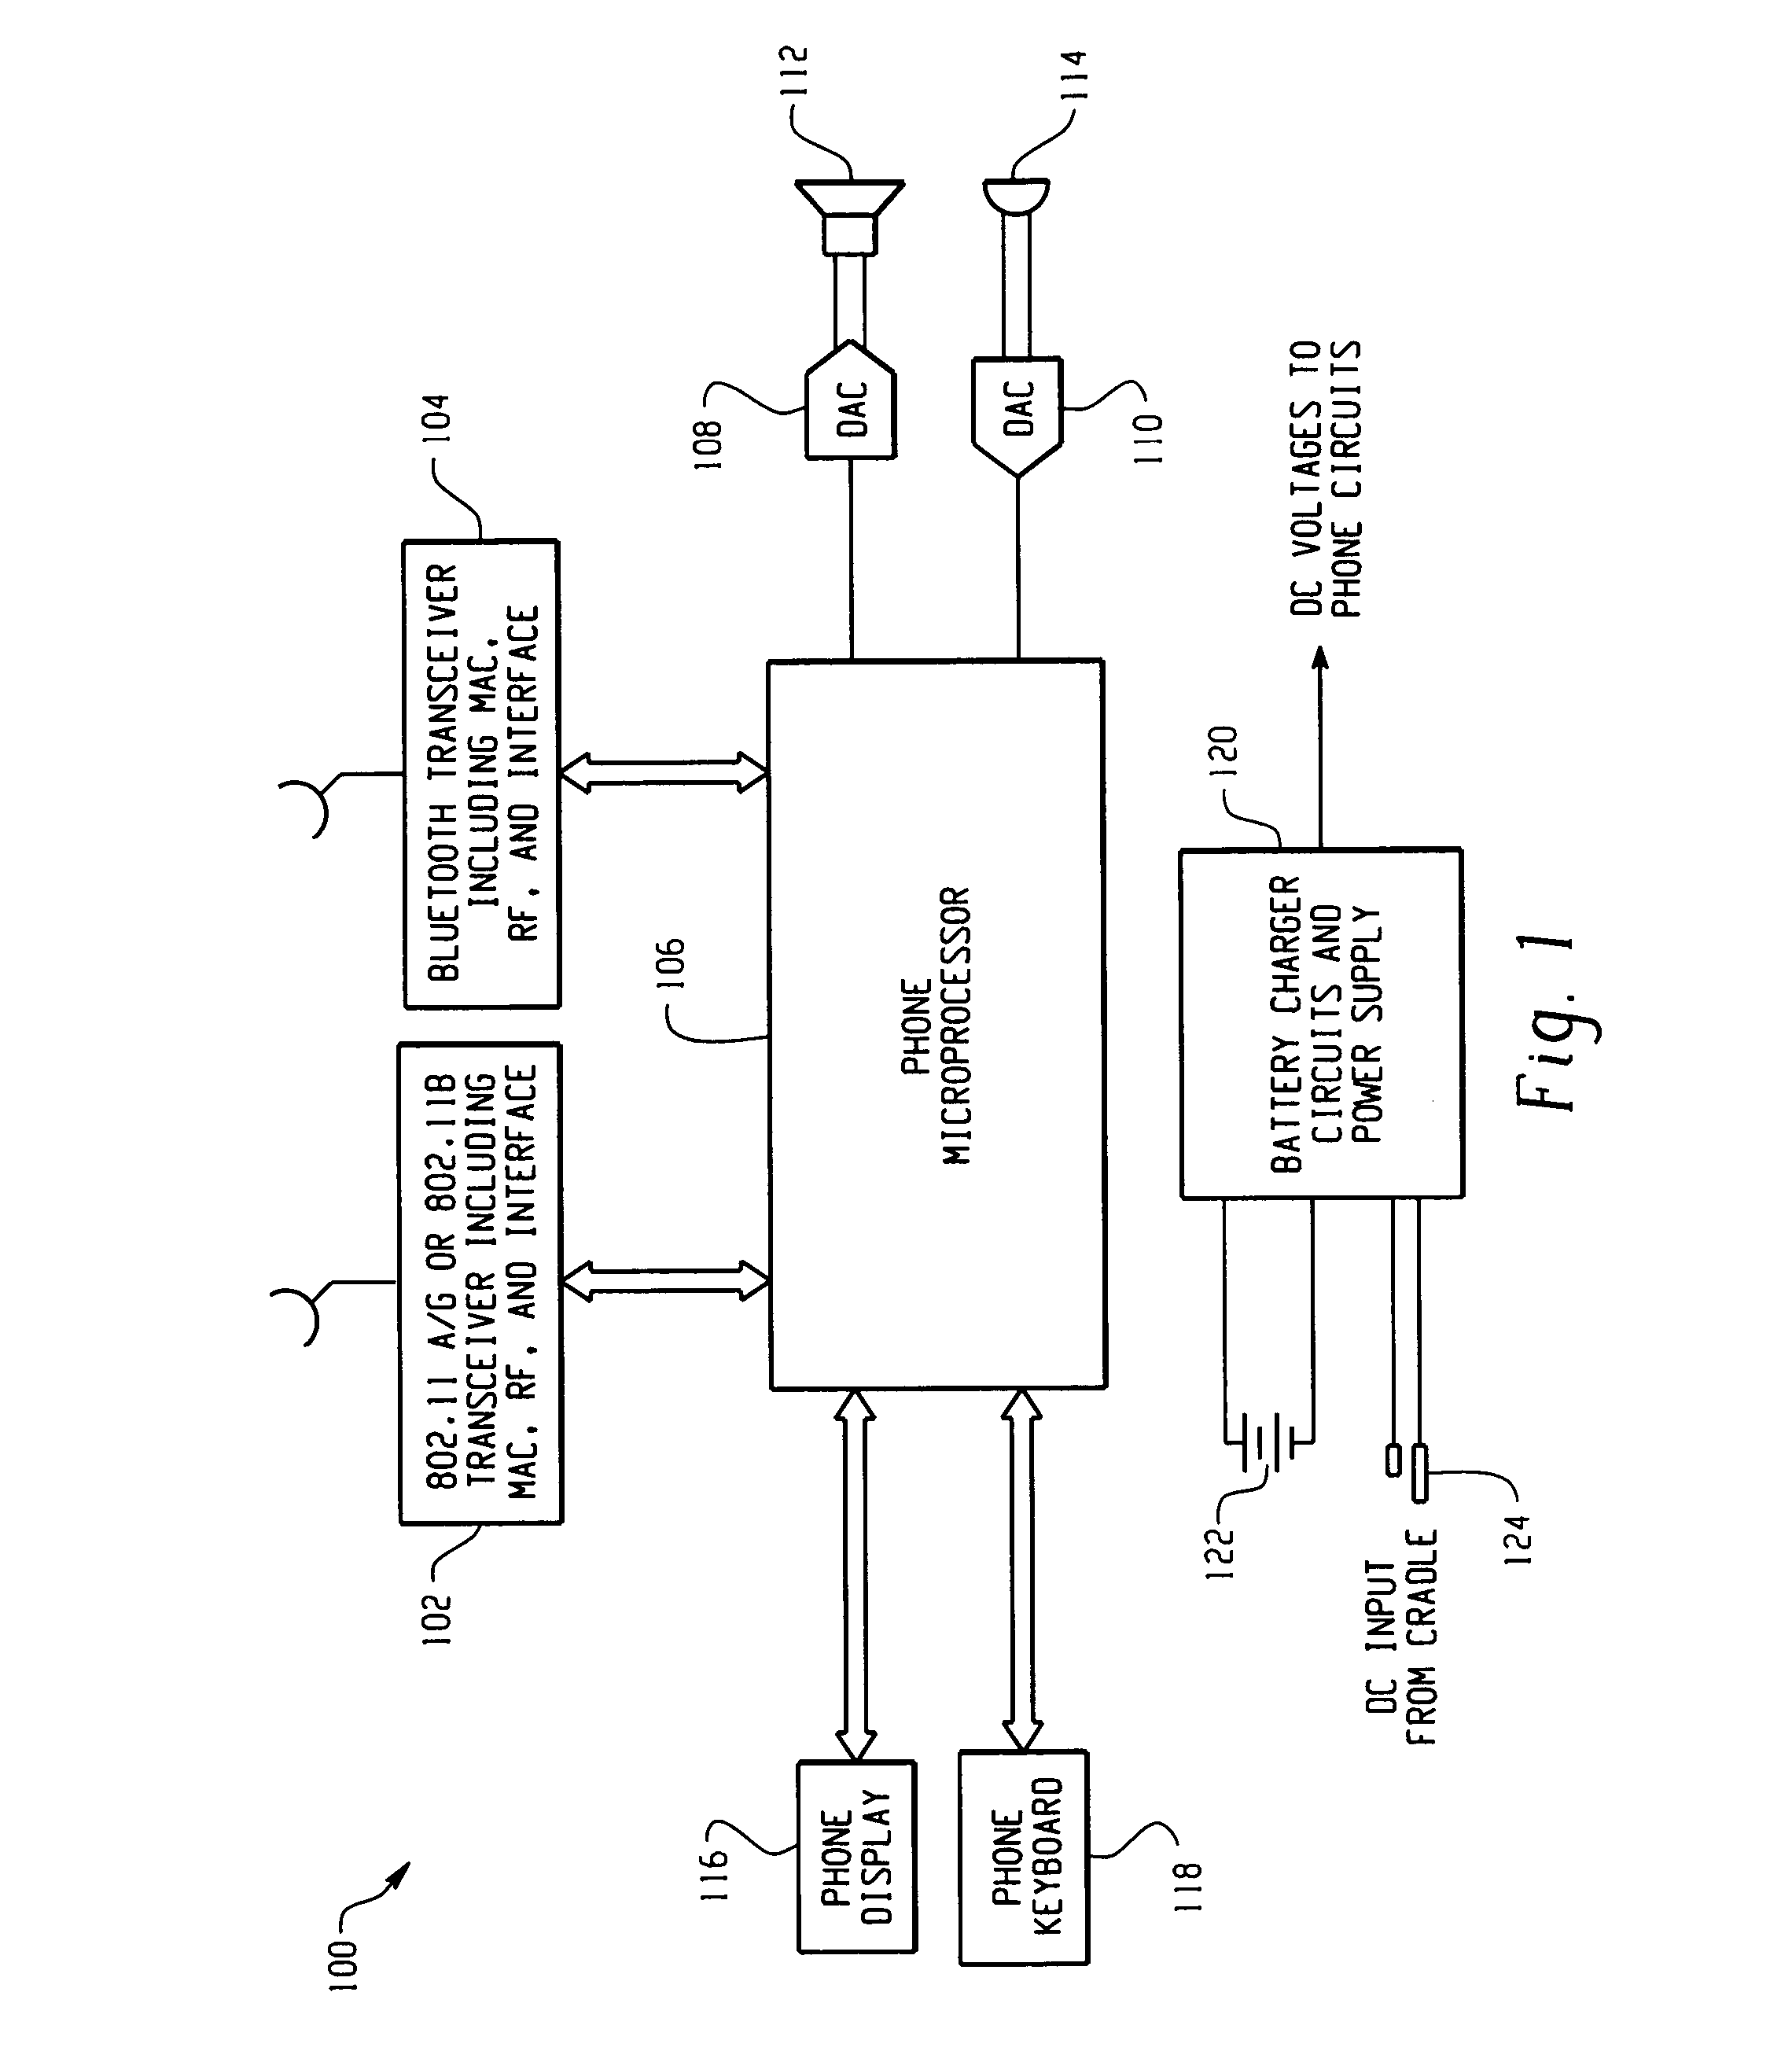 Hybrid wireless IP phone system and method for using the same